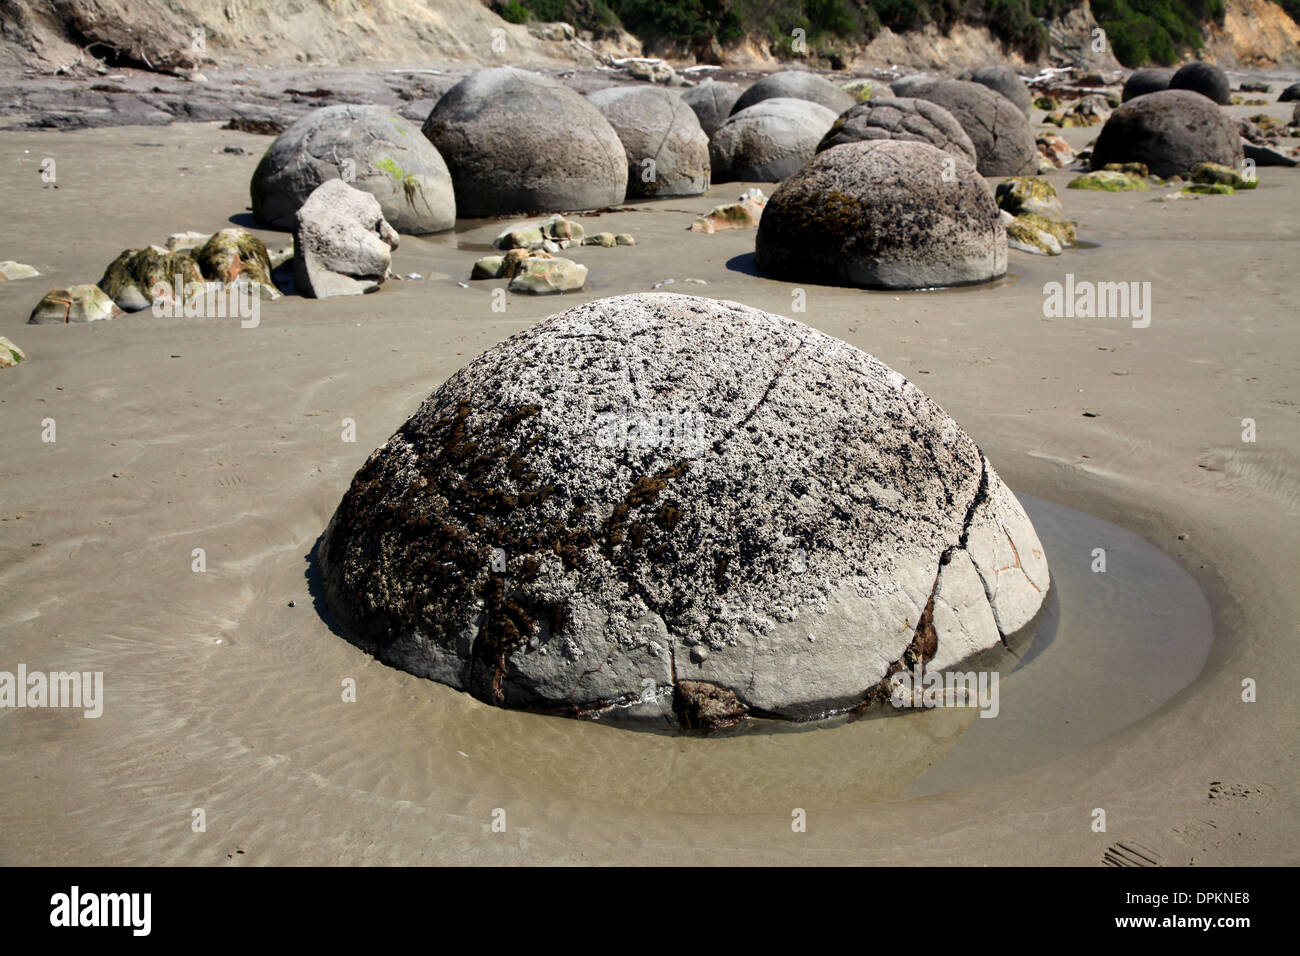 The Moeraki boulders are a geological wonder and can be seen at Koekohe beach in Otago South Island New Zealand Stock Photo